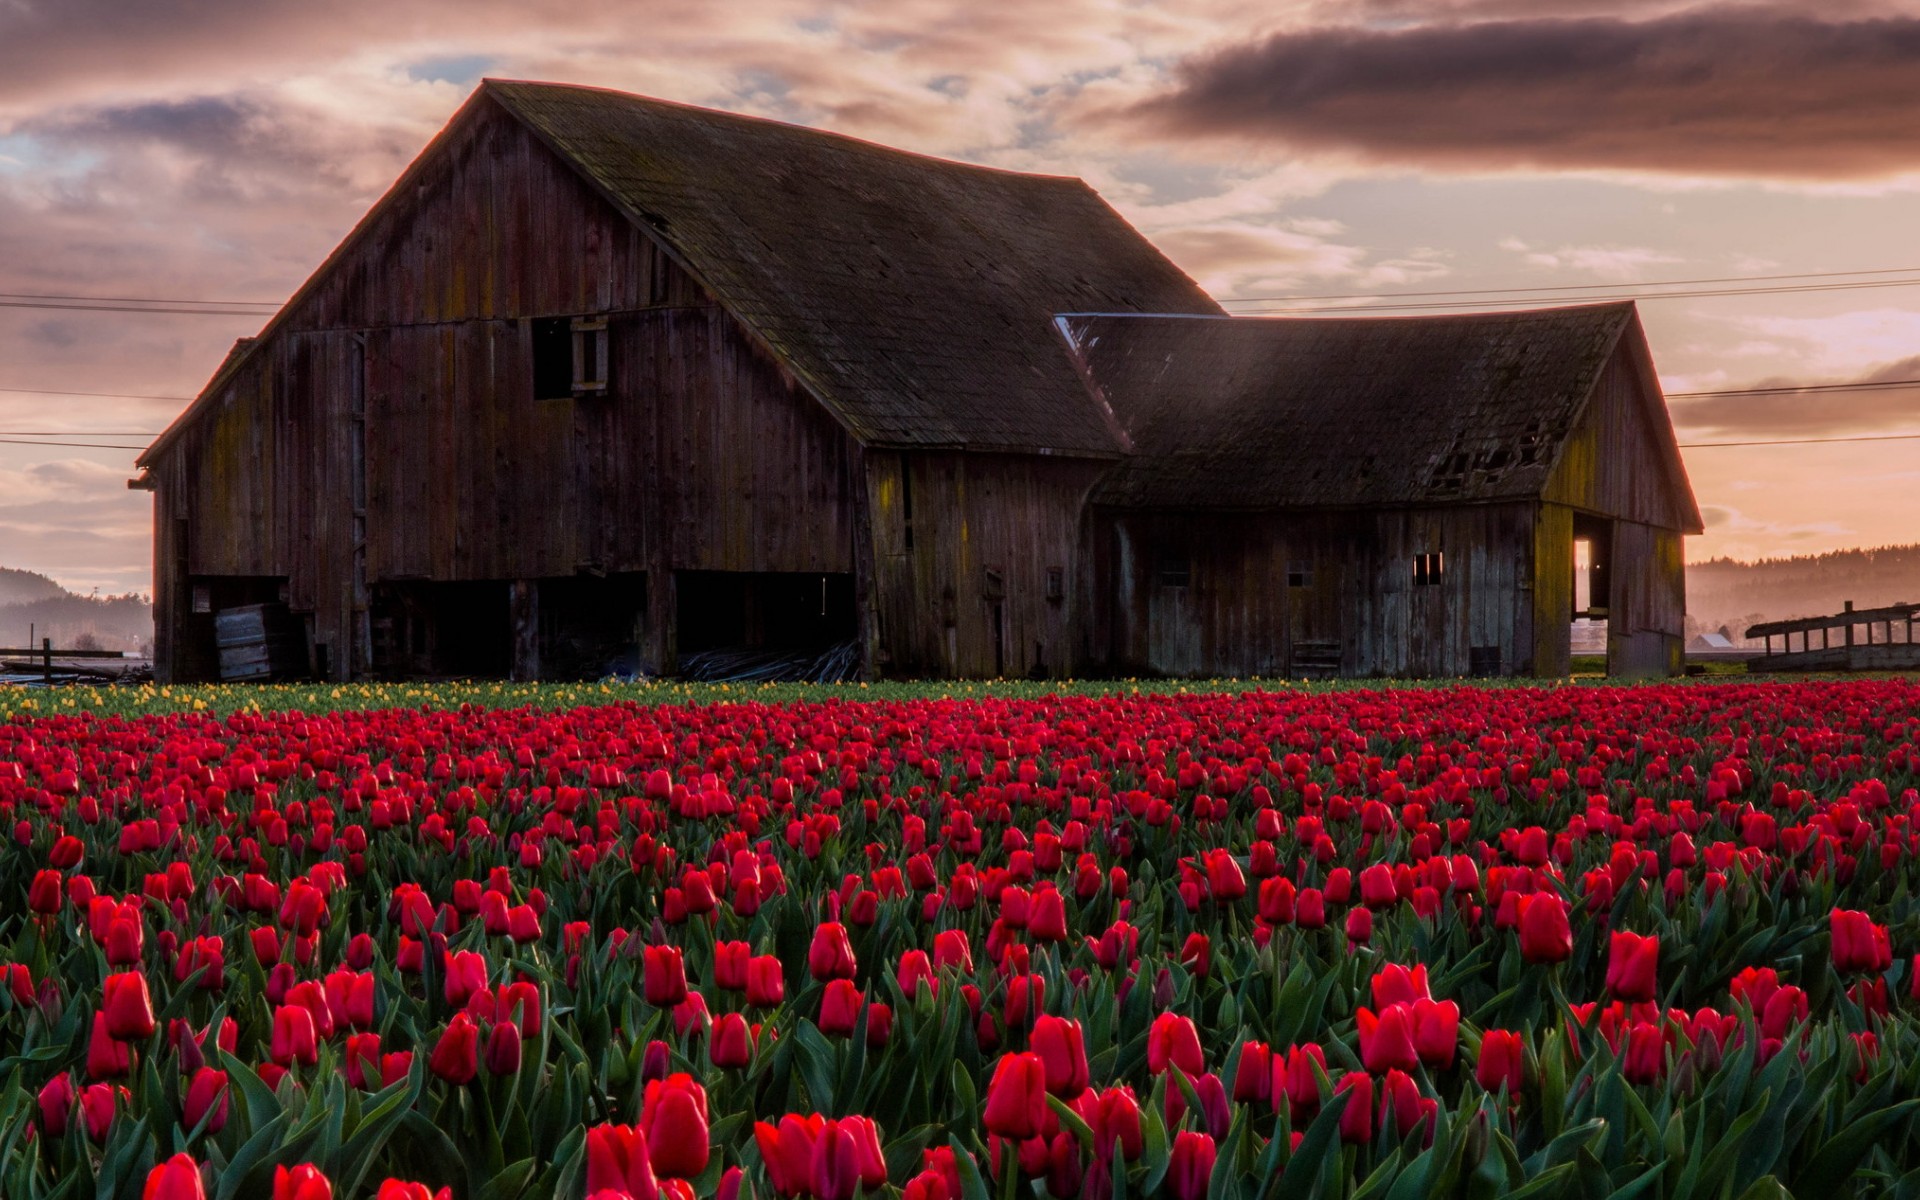 Earth Nature Barn Tulip Field Red Flower Building 1920x1200